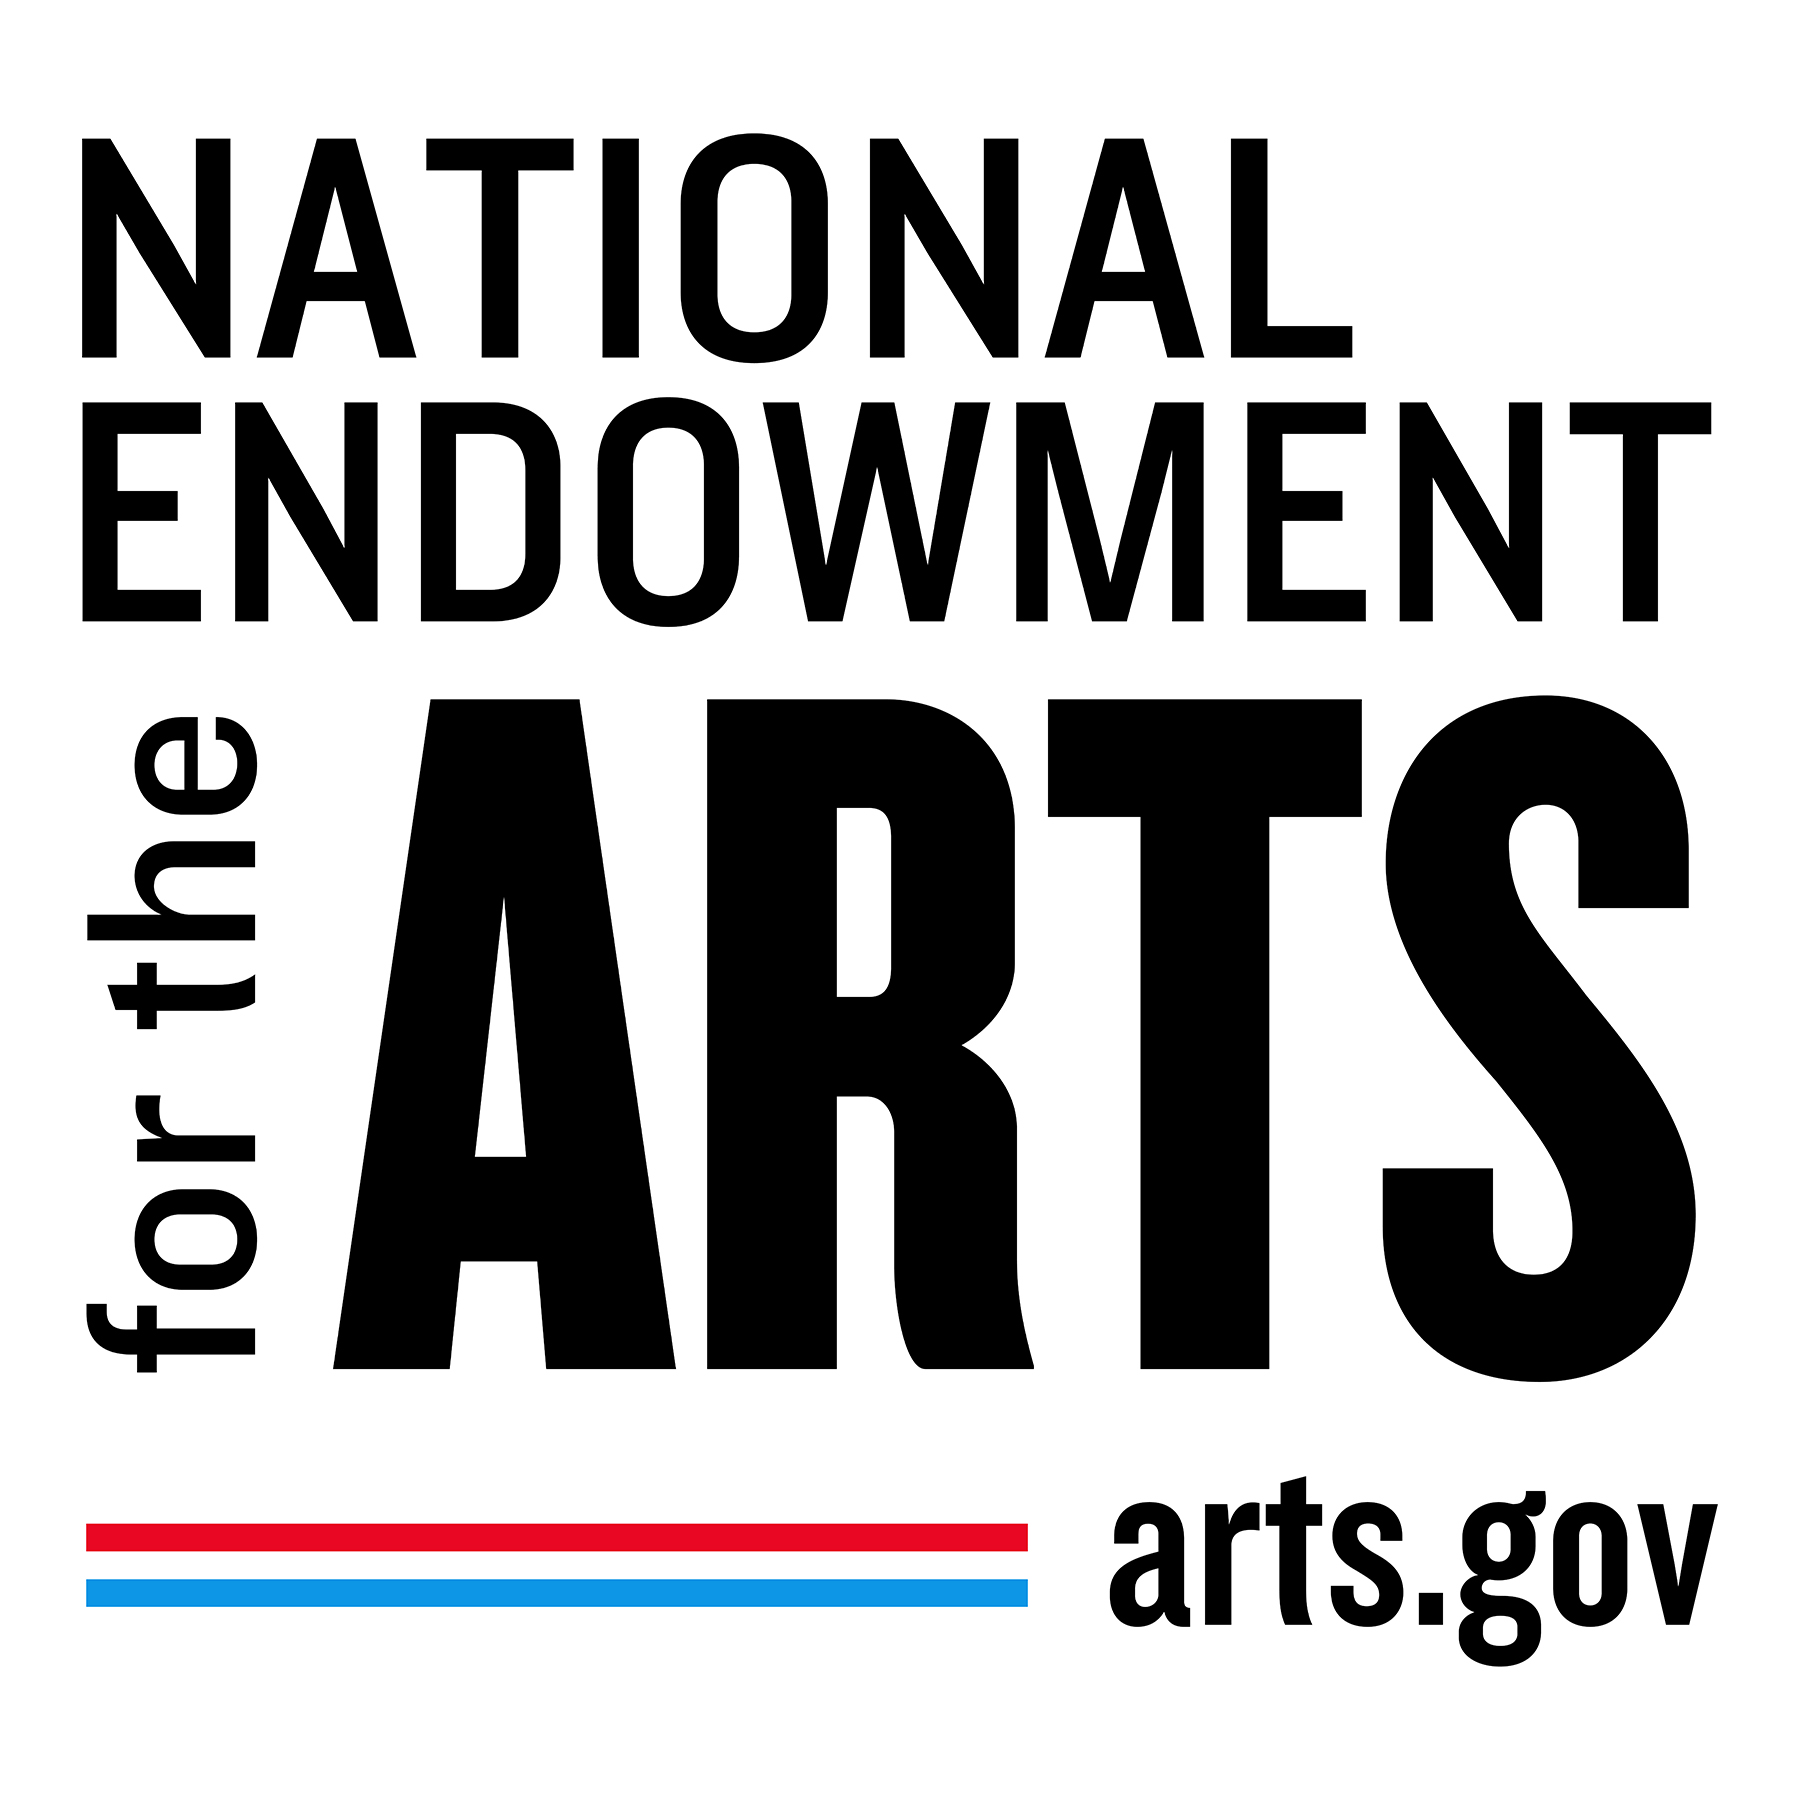 National Endowment for the Arts